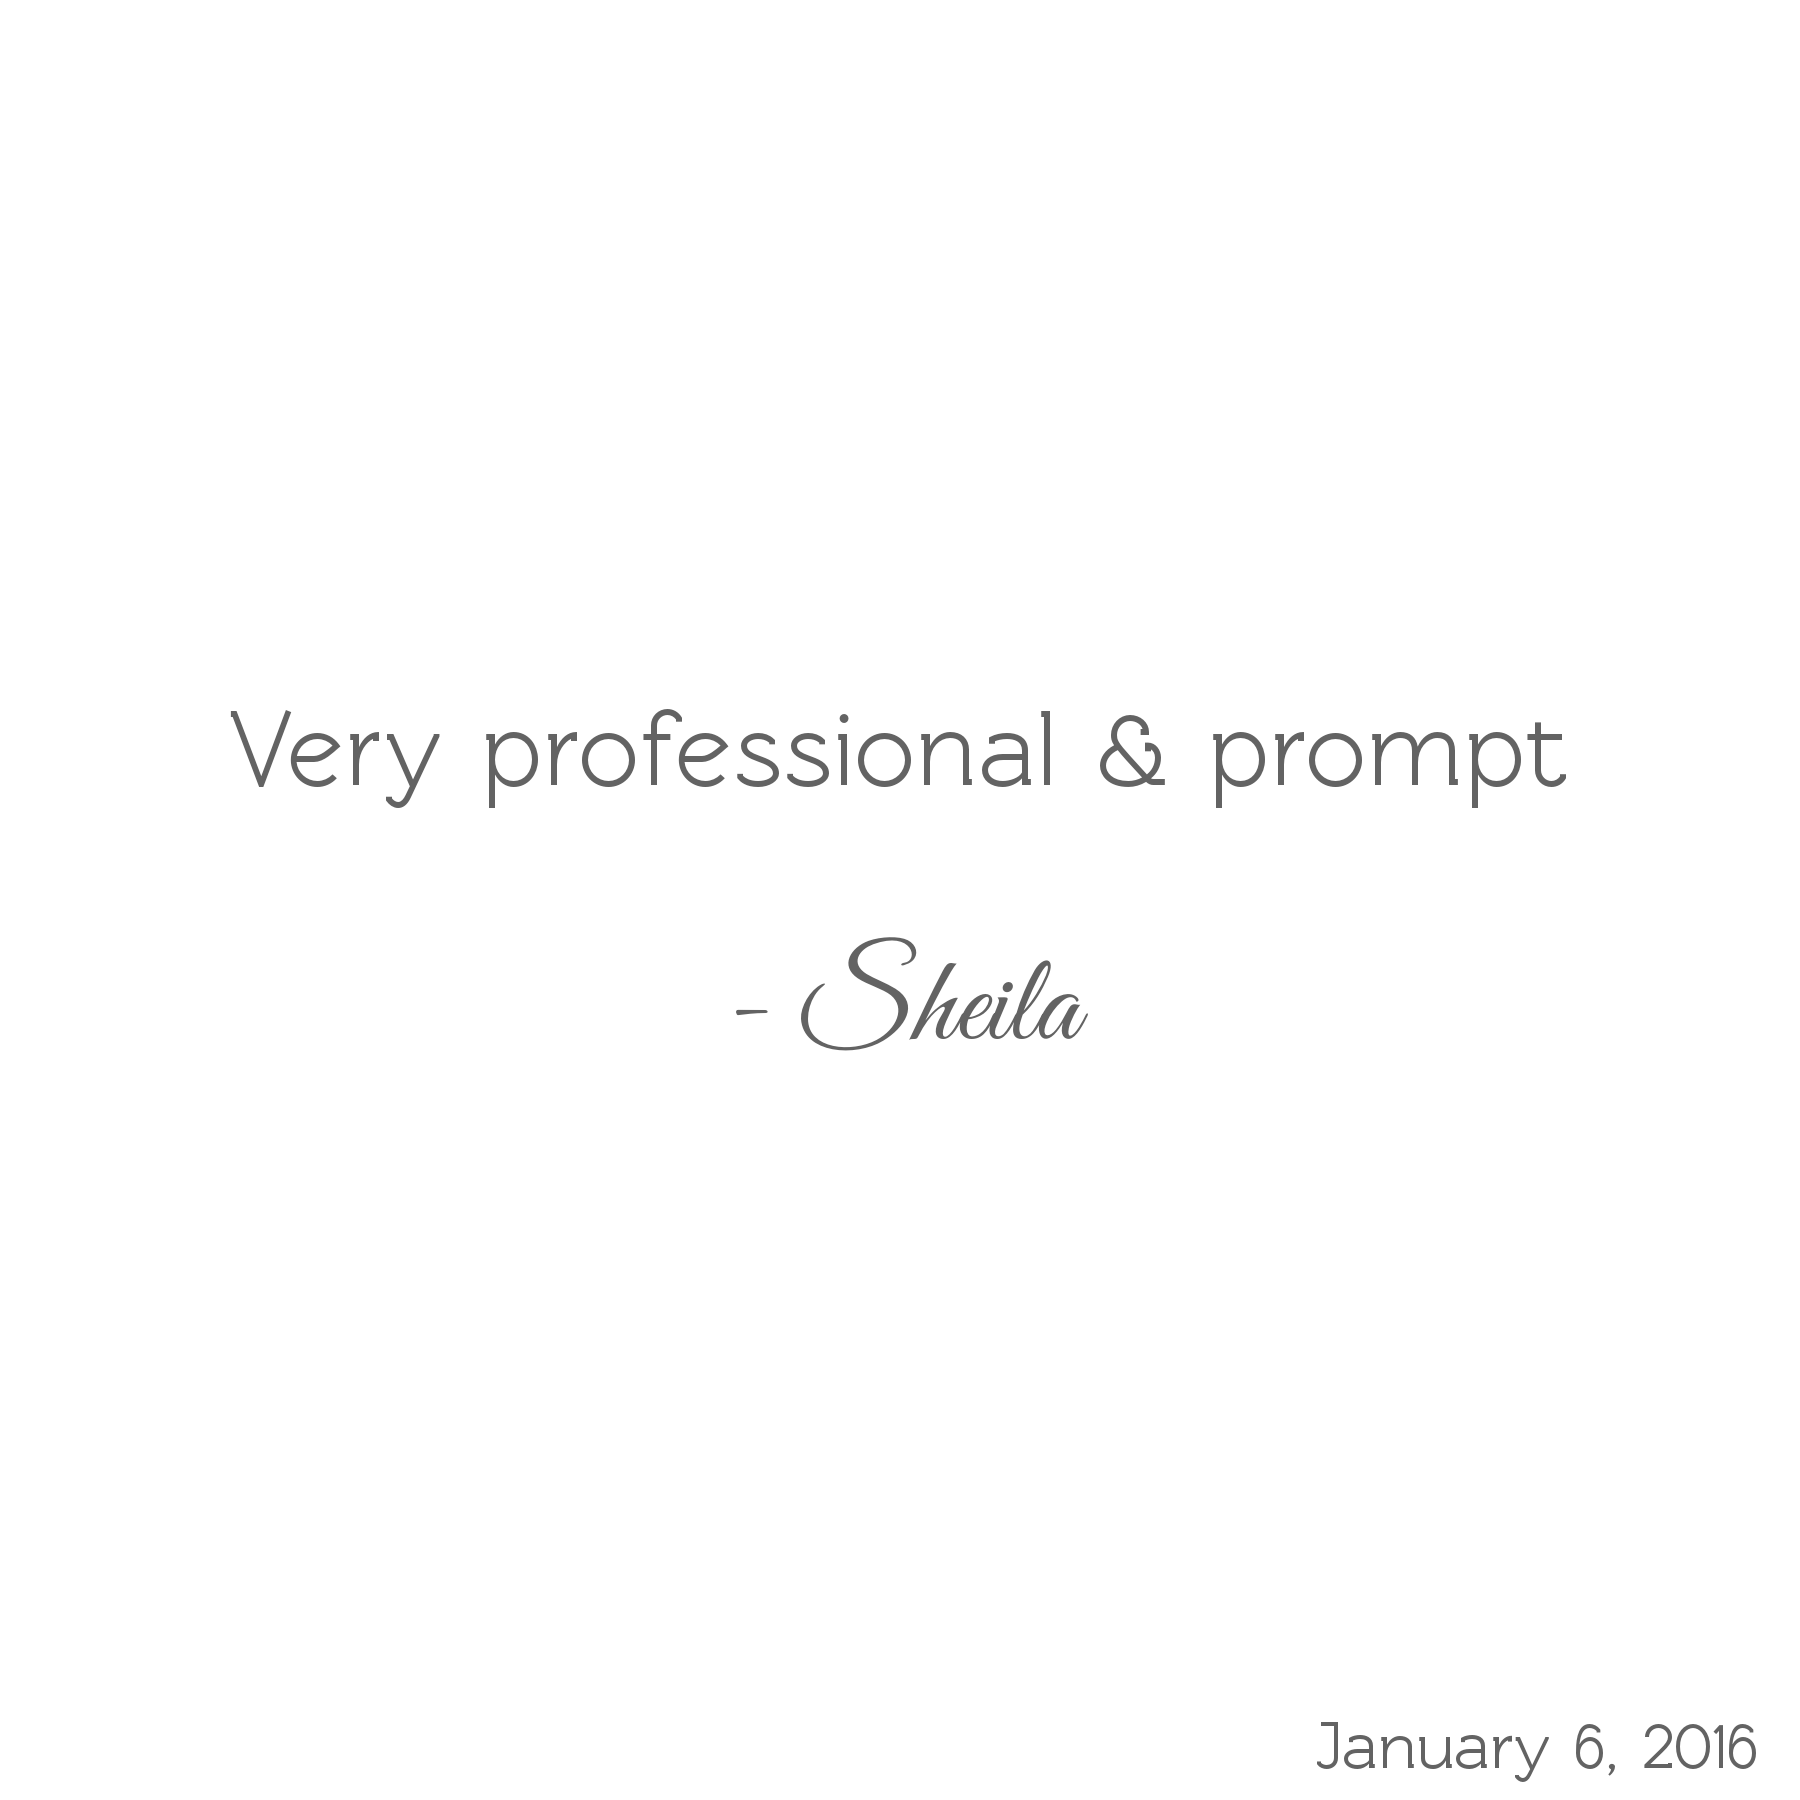 Very professional & prompt -Sheila